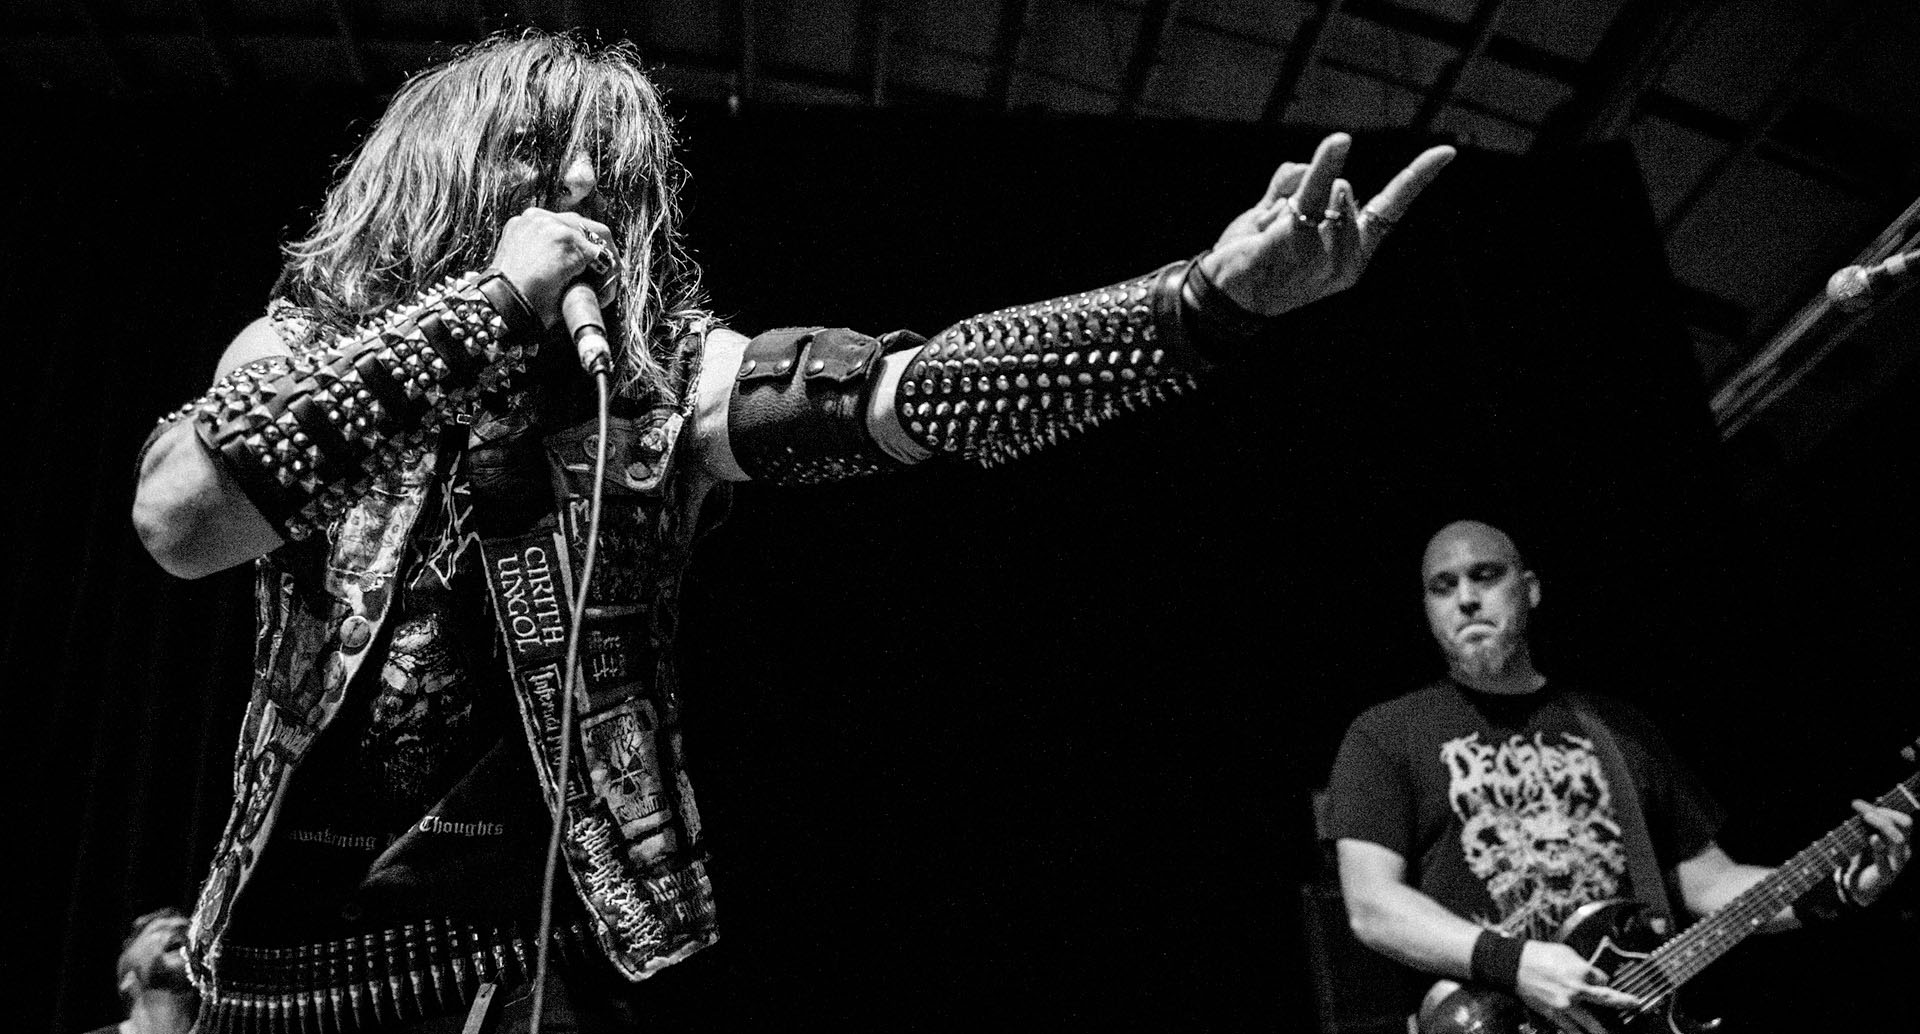  Nunslaughter Asian Tour Postponed due to concern with COVID-19